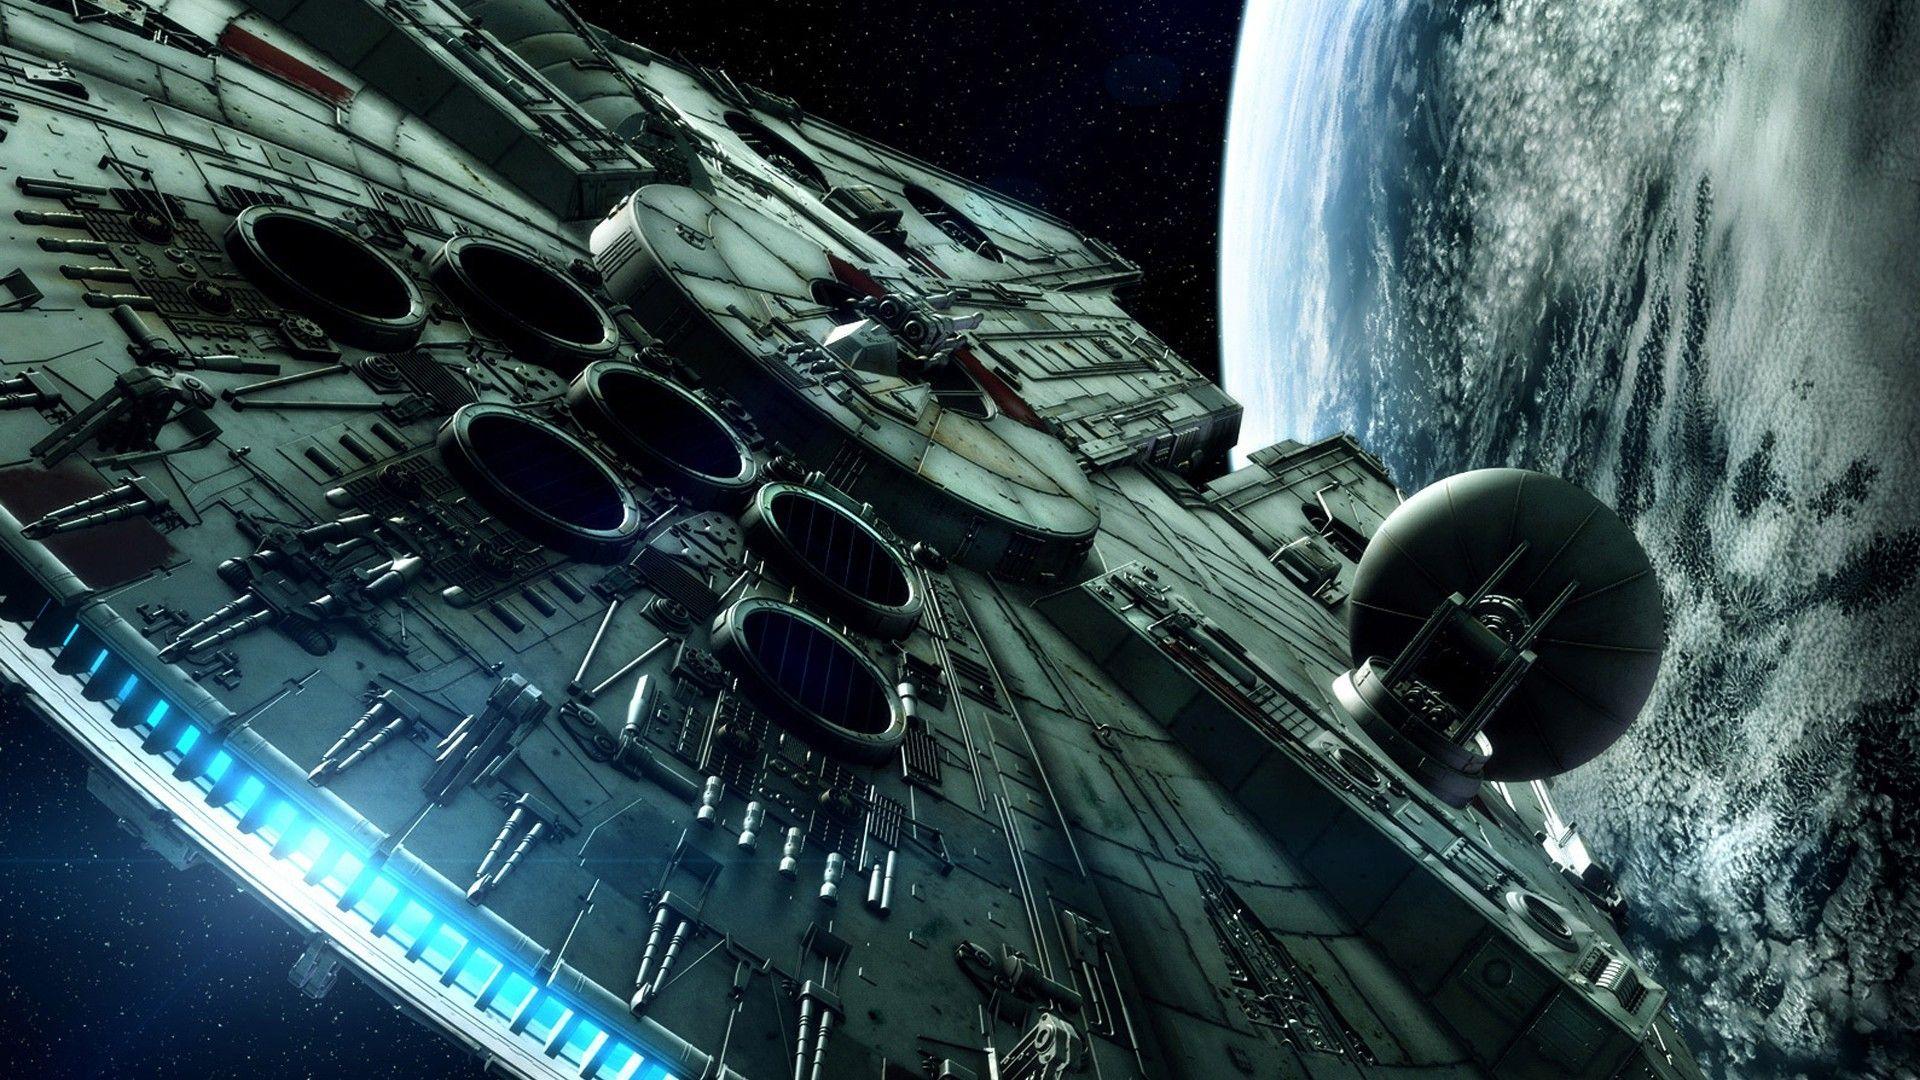 Awesome Star Wars Wallpaper 45246 1920x1080 px